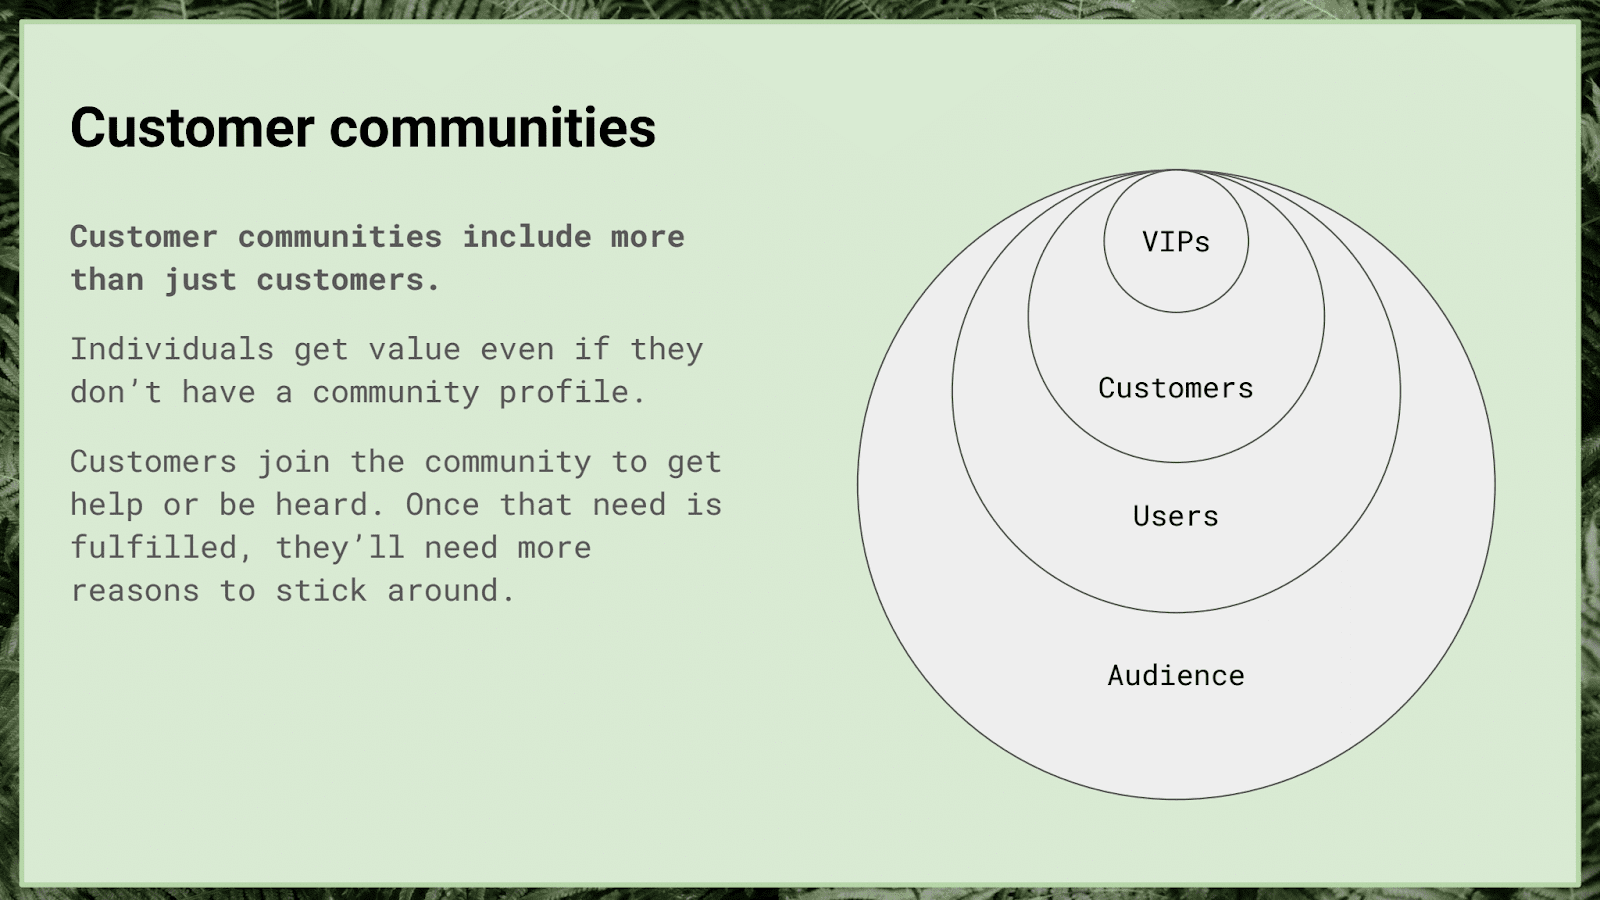 Customer communities include more than just customers, offering value even to those without a community profile. Customers join for help or to be heard, but will need additional reasons to stay once their initial needs are met. A diagram on the right shows concentric circles labeled from outermost to innermost: Audience, Users, Customers, and VIPs.